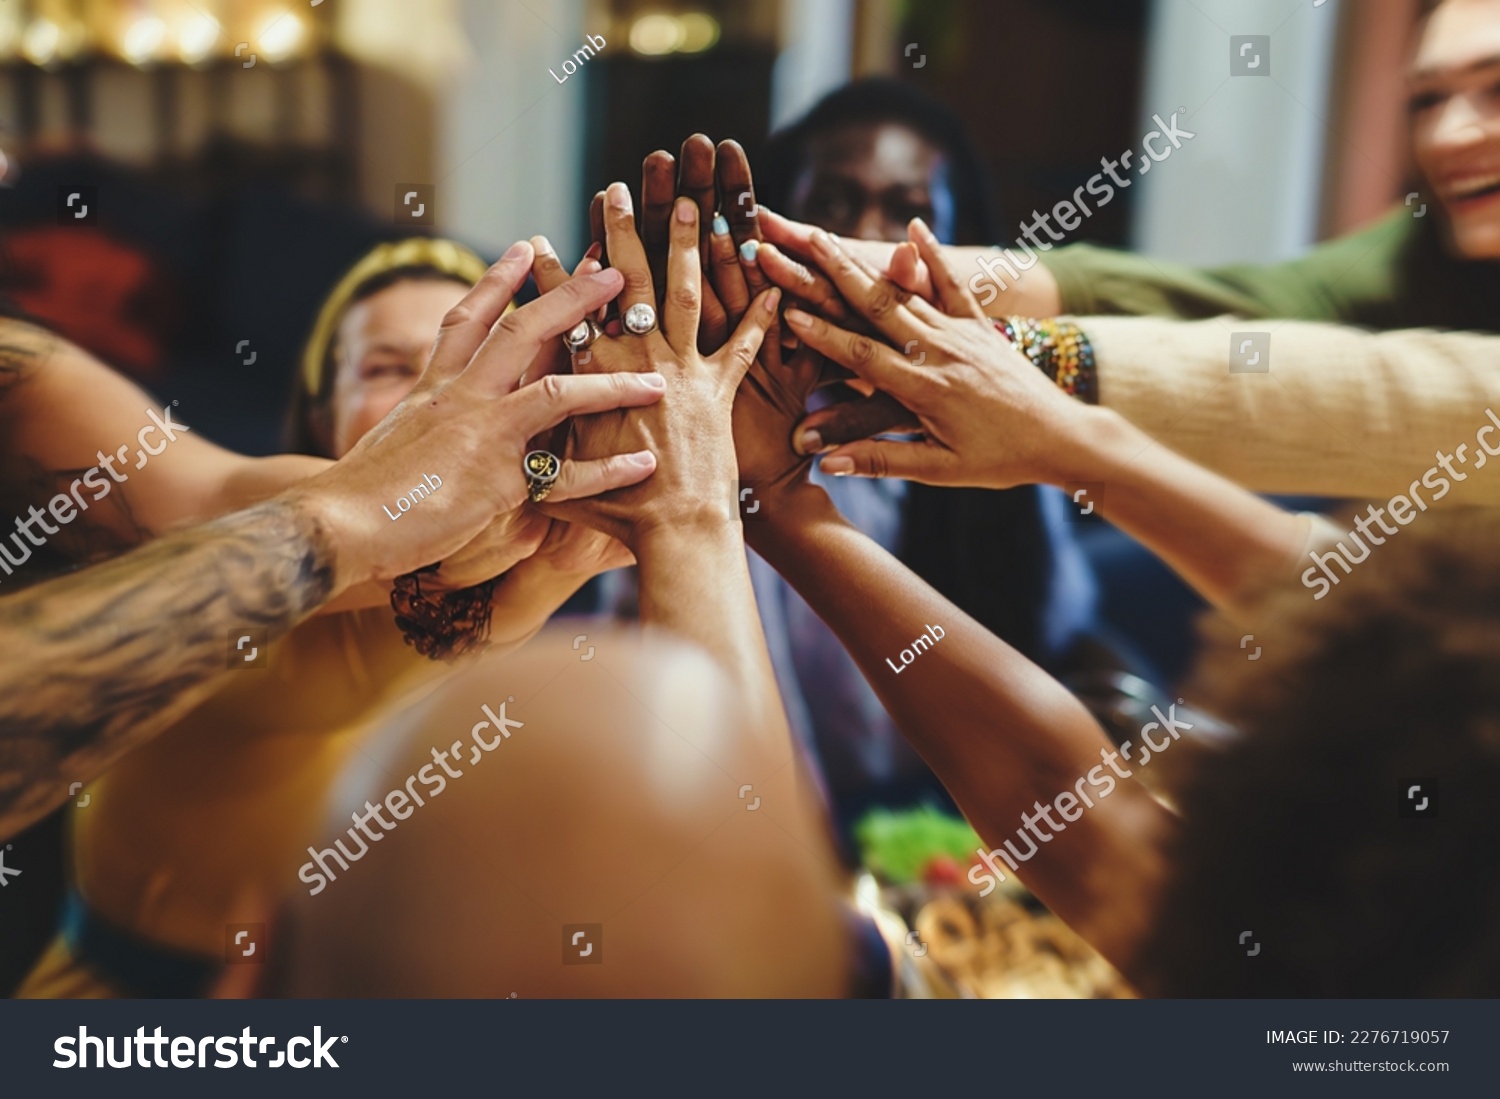 A diverse group of friends, in their forties, with various ethnicities and tattoos, gather around a table for dinner. They enthusiastically join hands in a high-five, blurred faces and focus on hands #2276719057